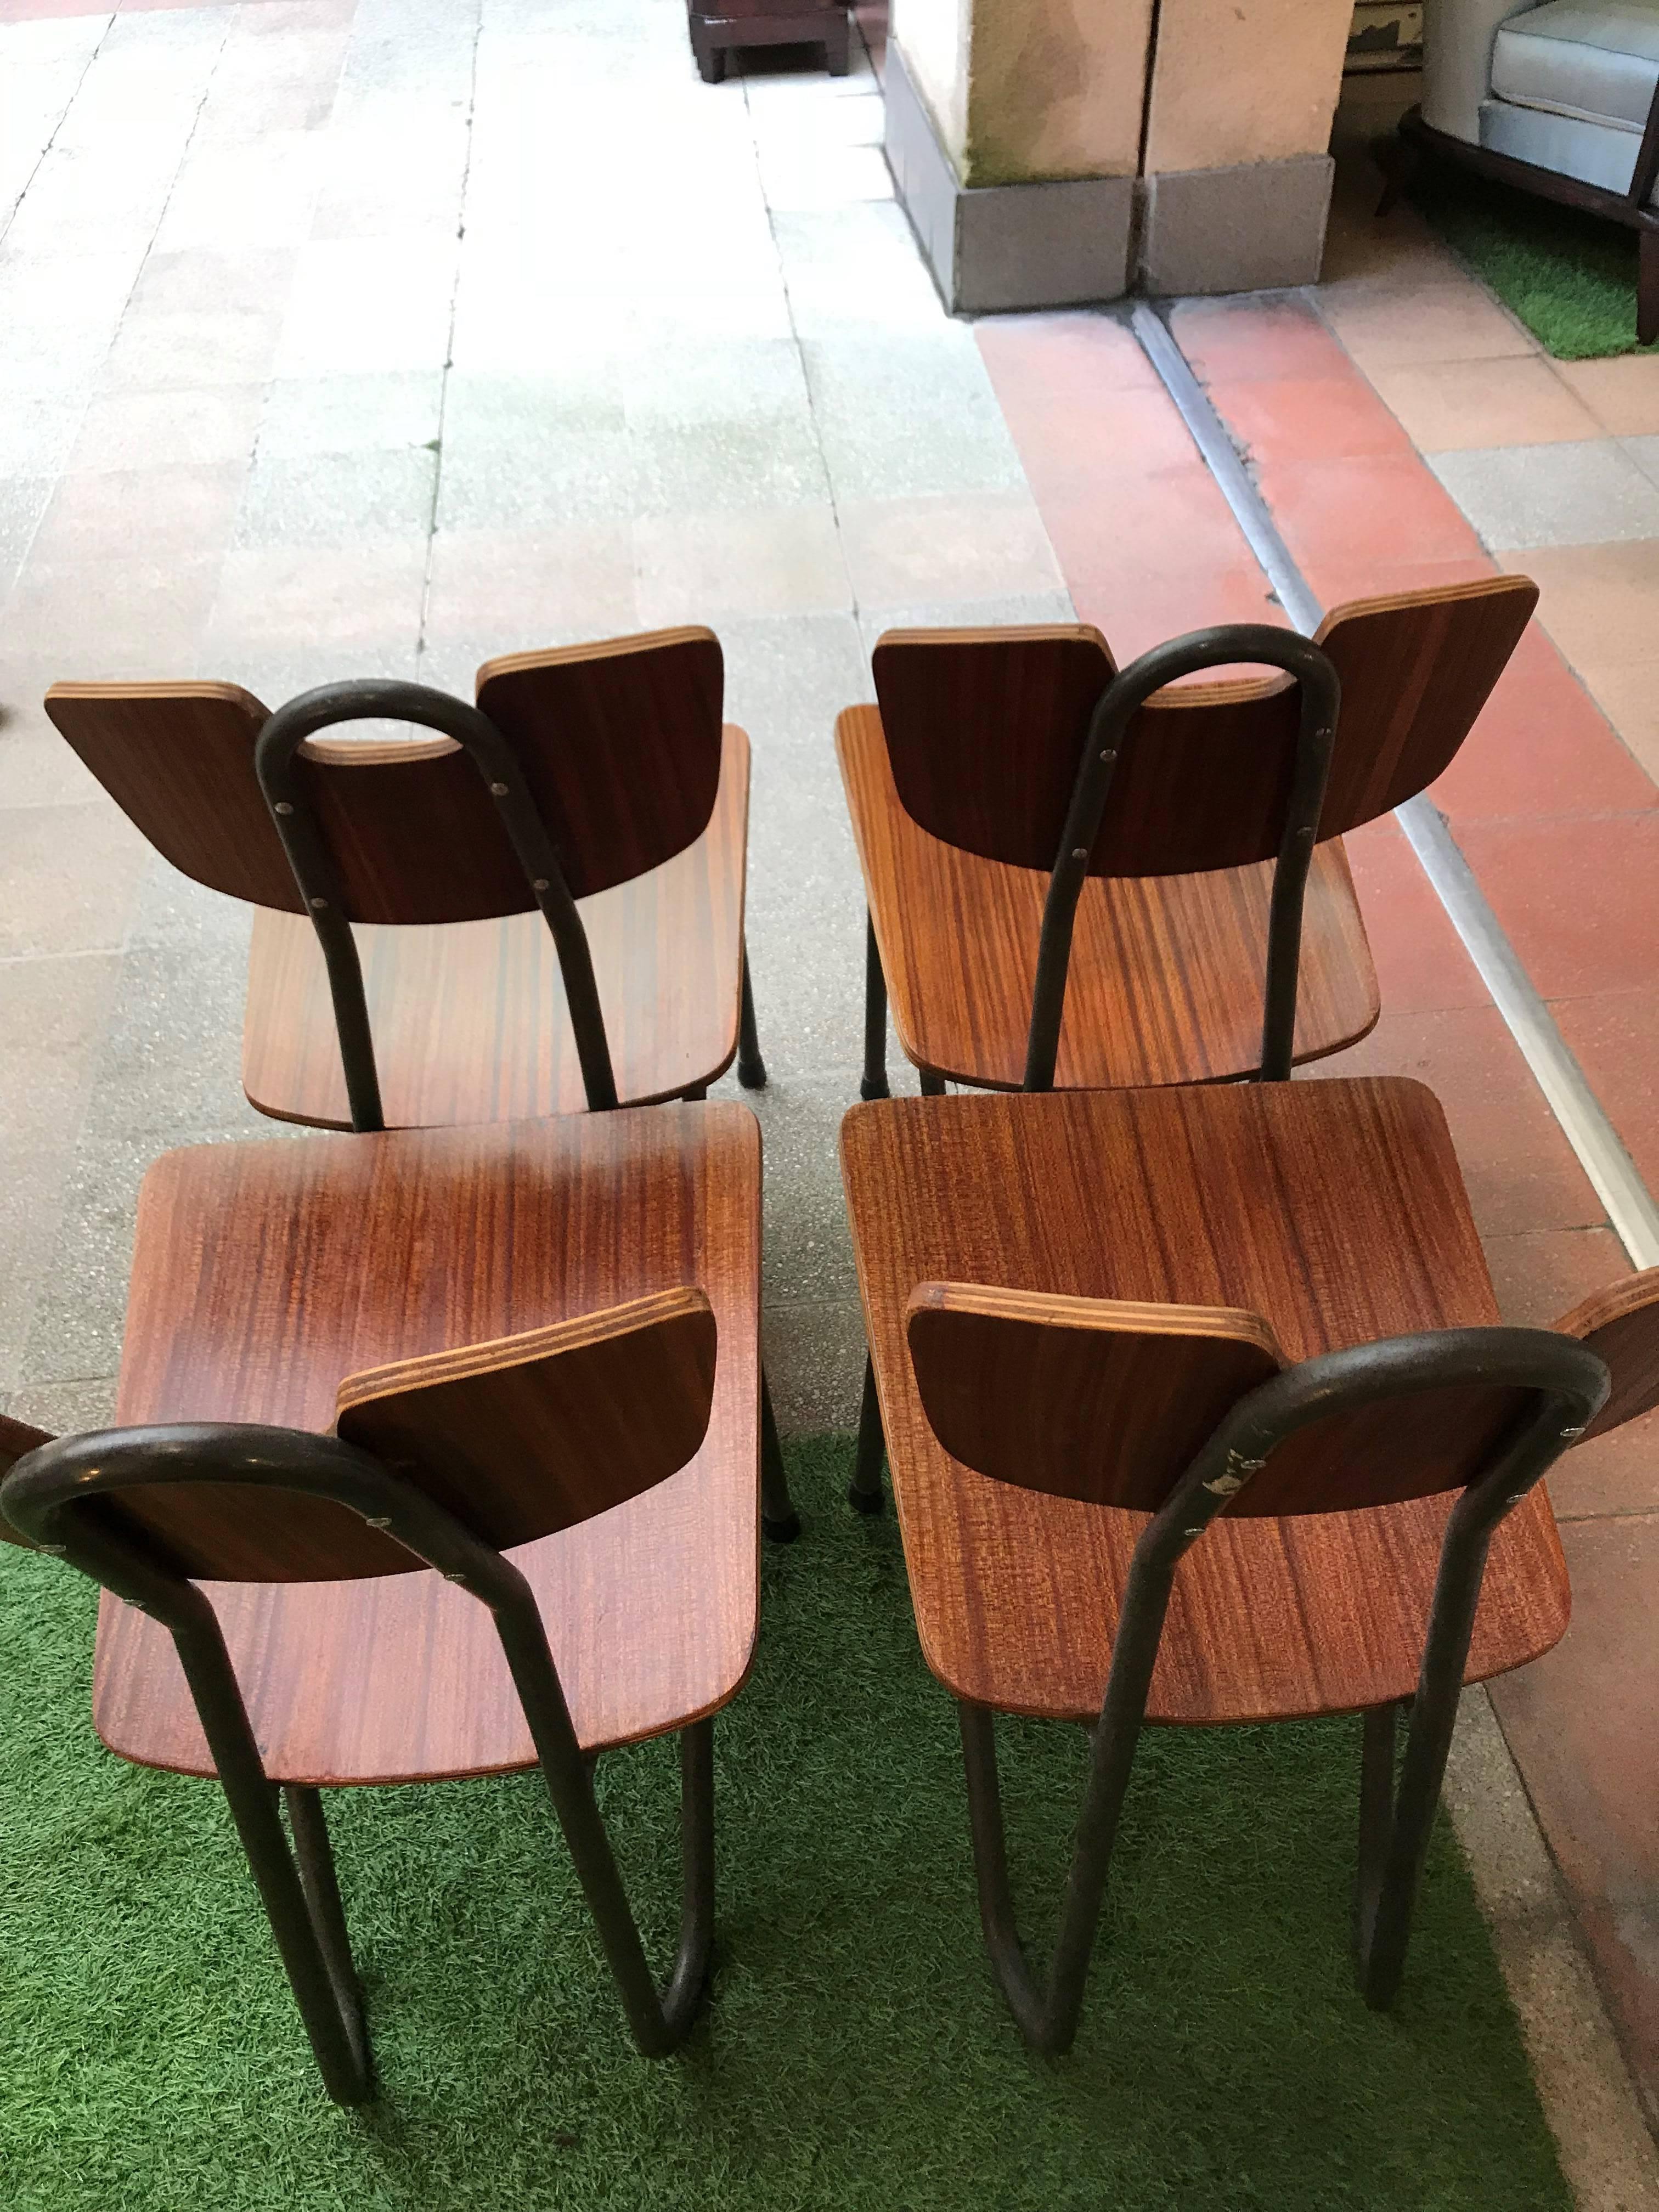 1951 Pierre Guariche, Prefacto Set of Four Chairs, Airborne Edition In Good Condition For Sale In Saint Ouen, FR